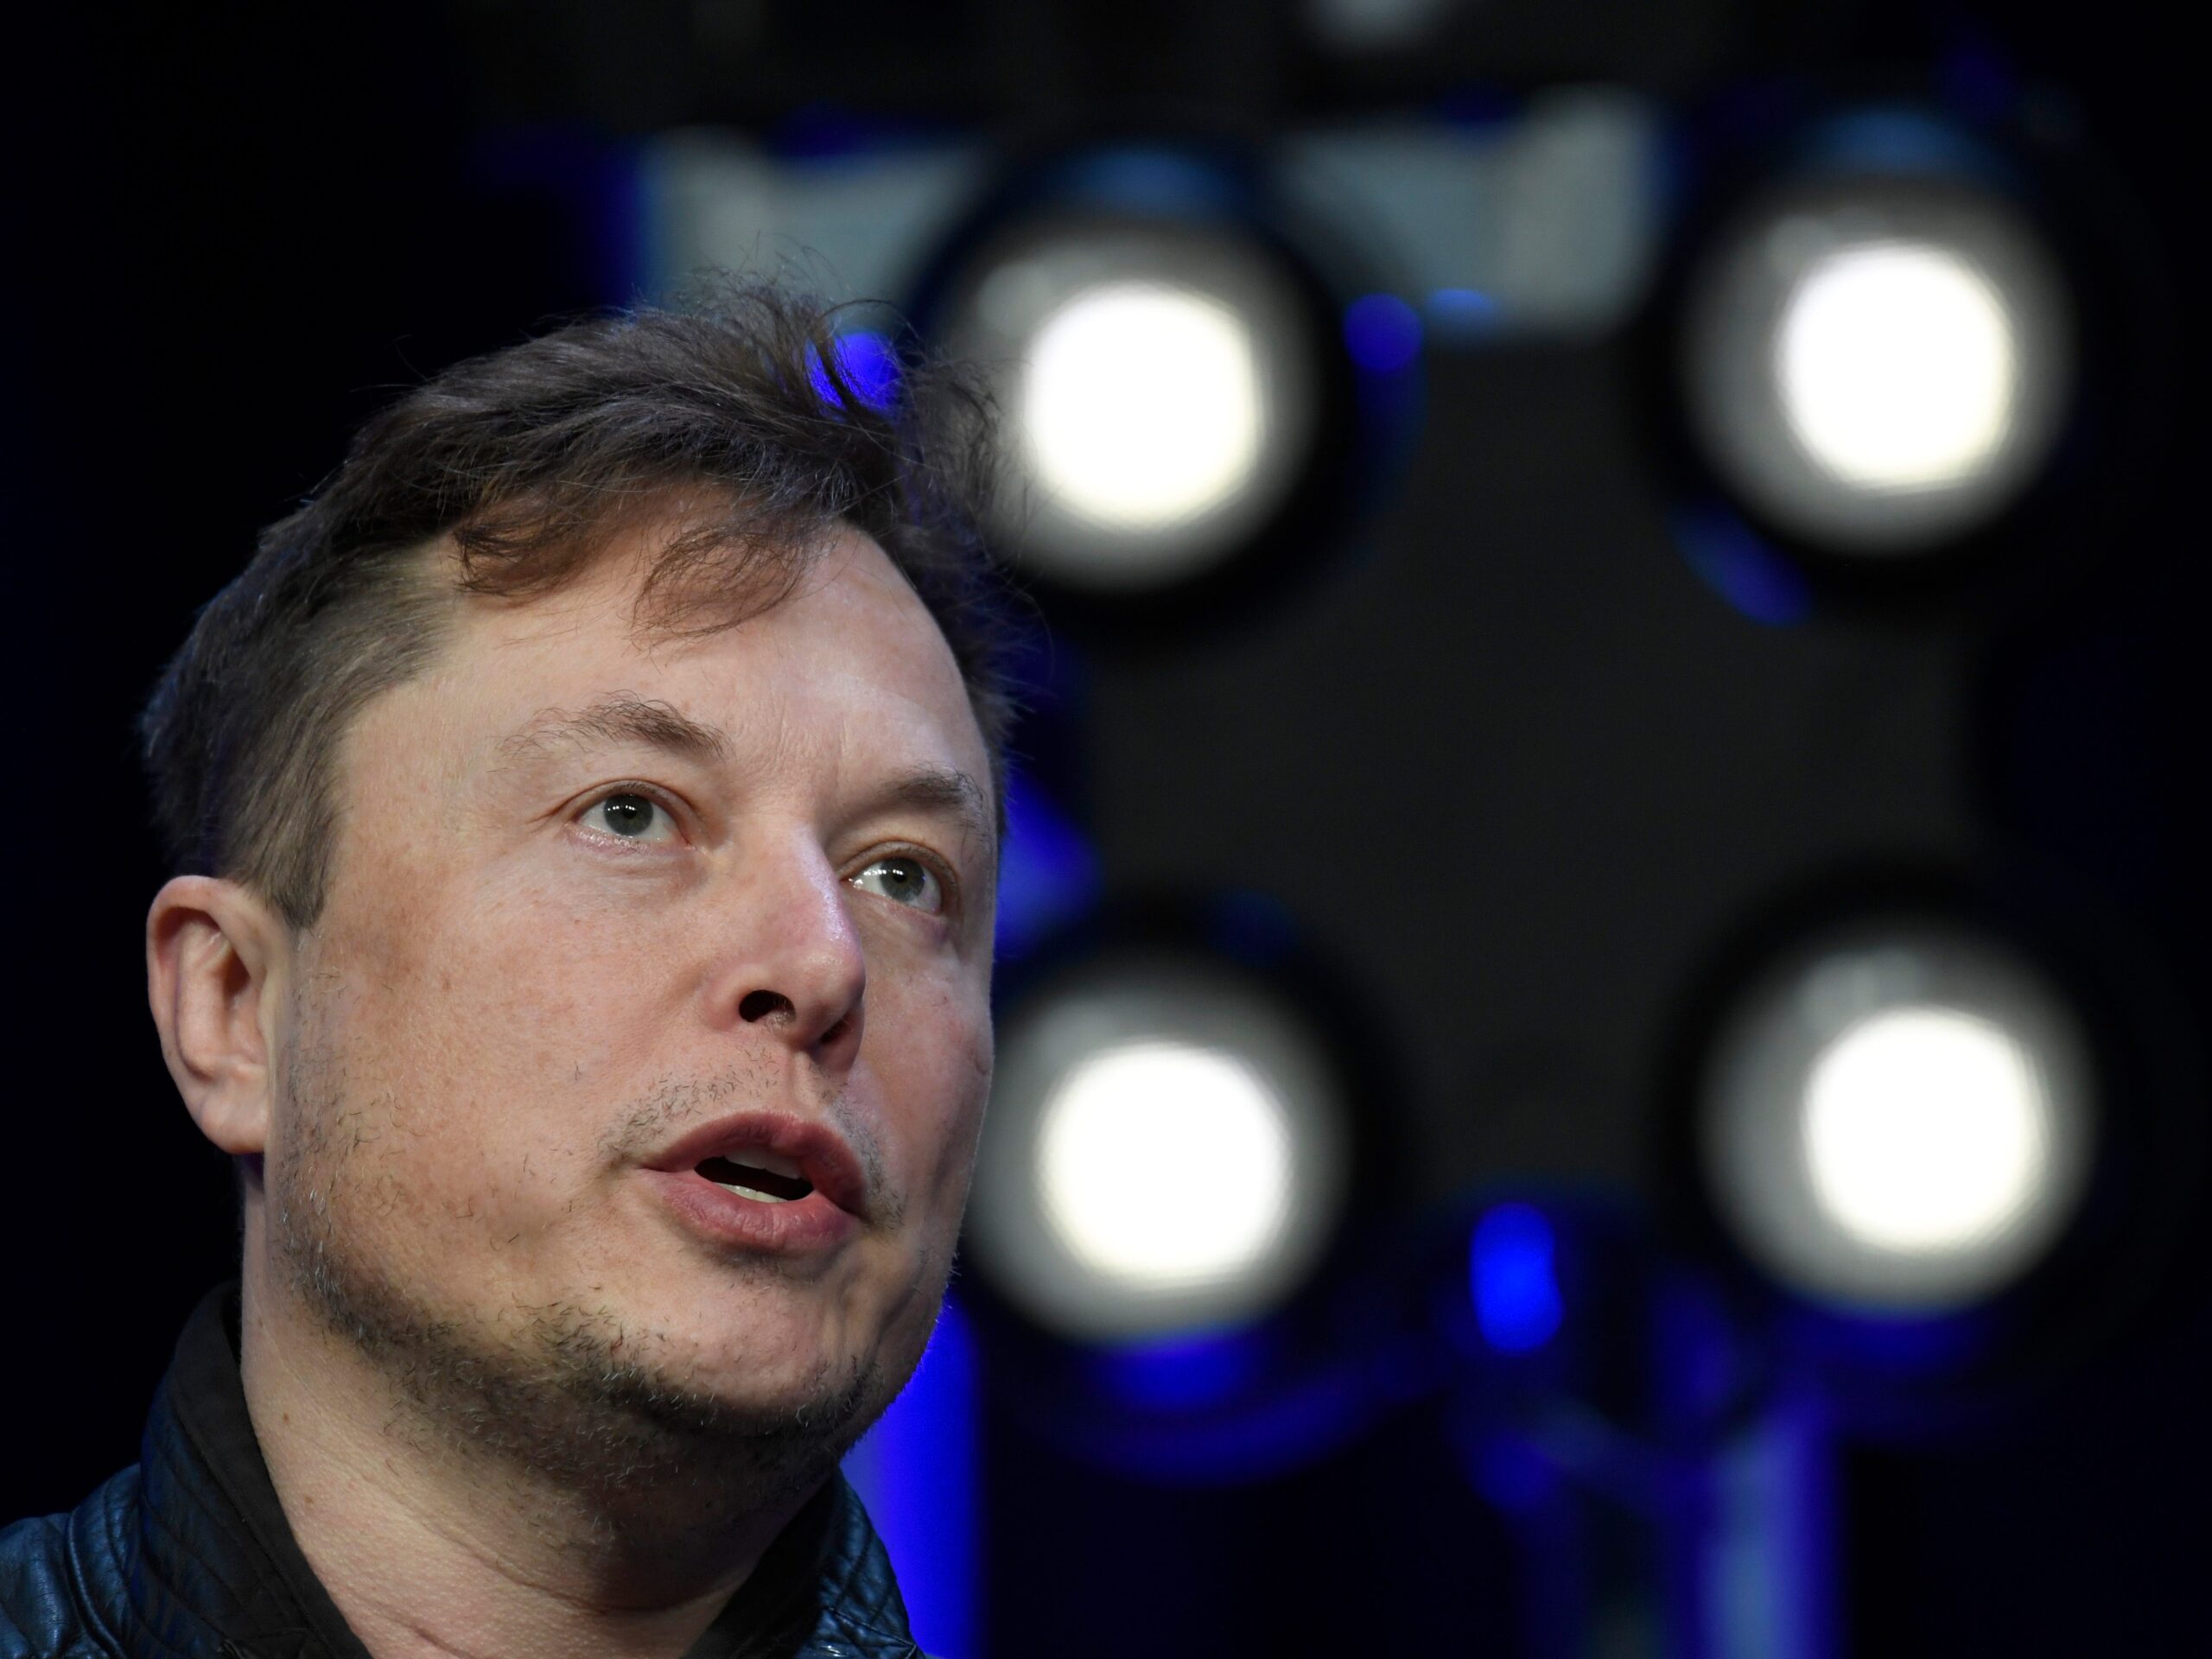 Elon Musk has brought Twitter to break even through an aggressive approach to management.